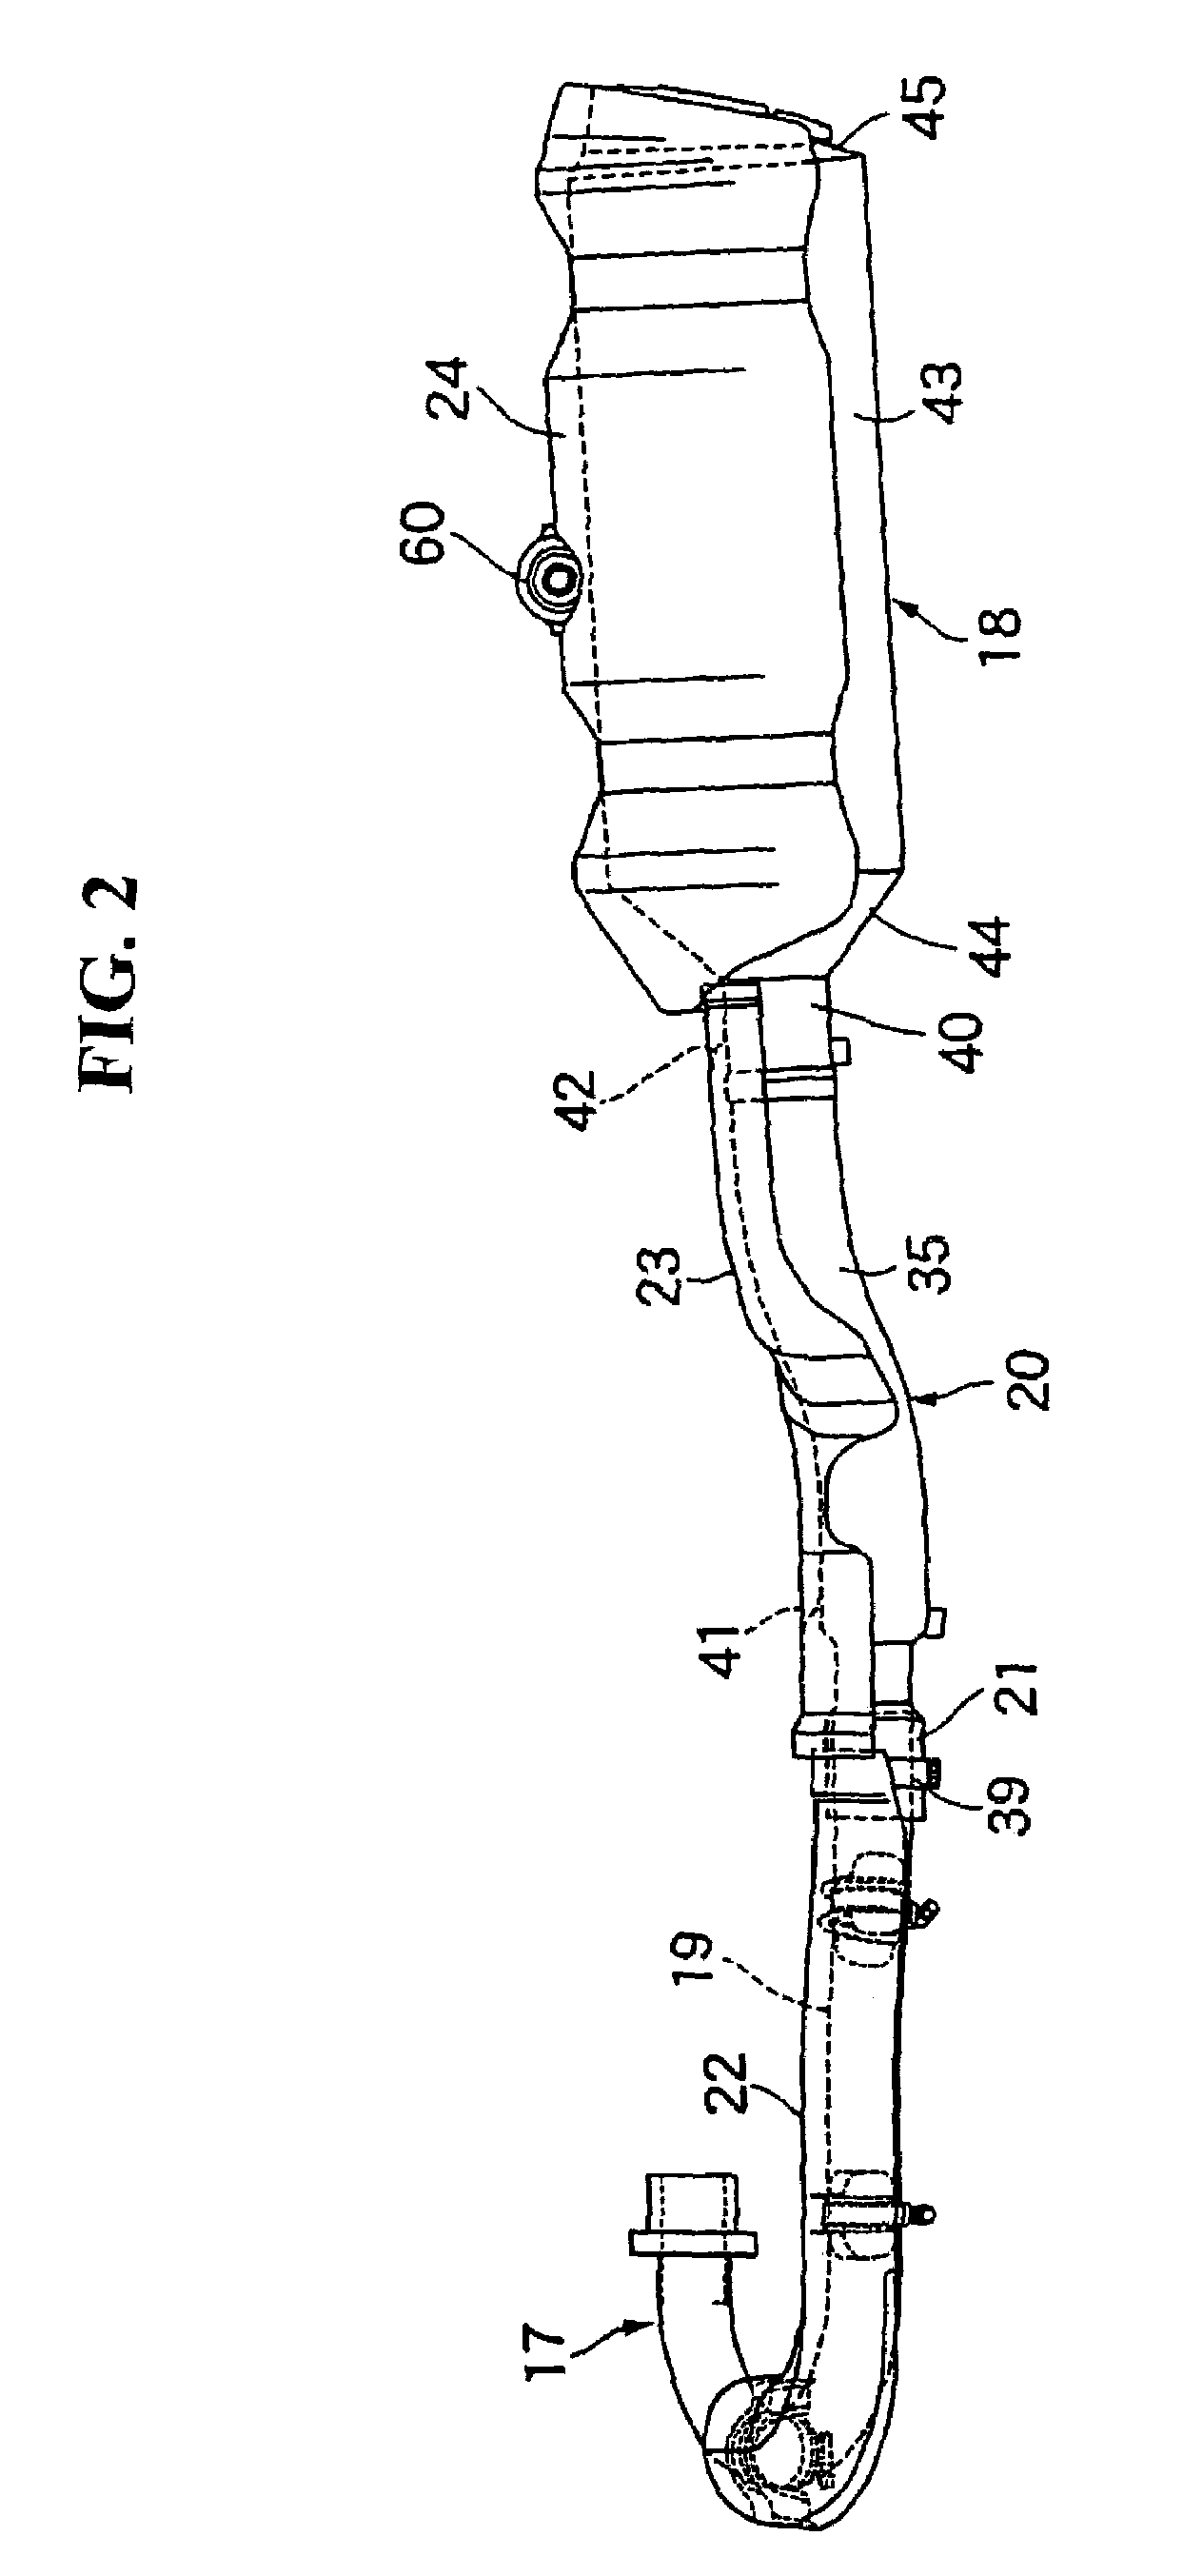 Exhaust device for vehicle engine